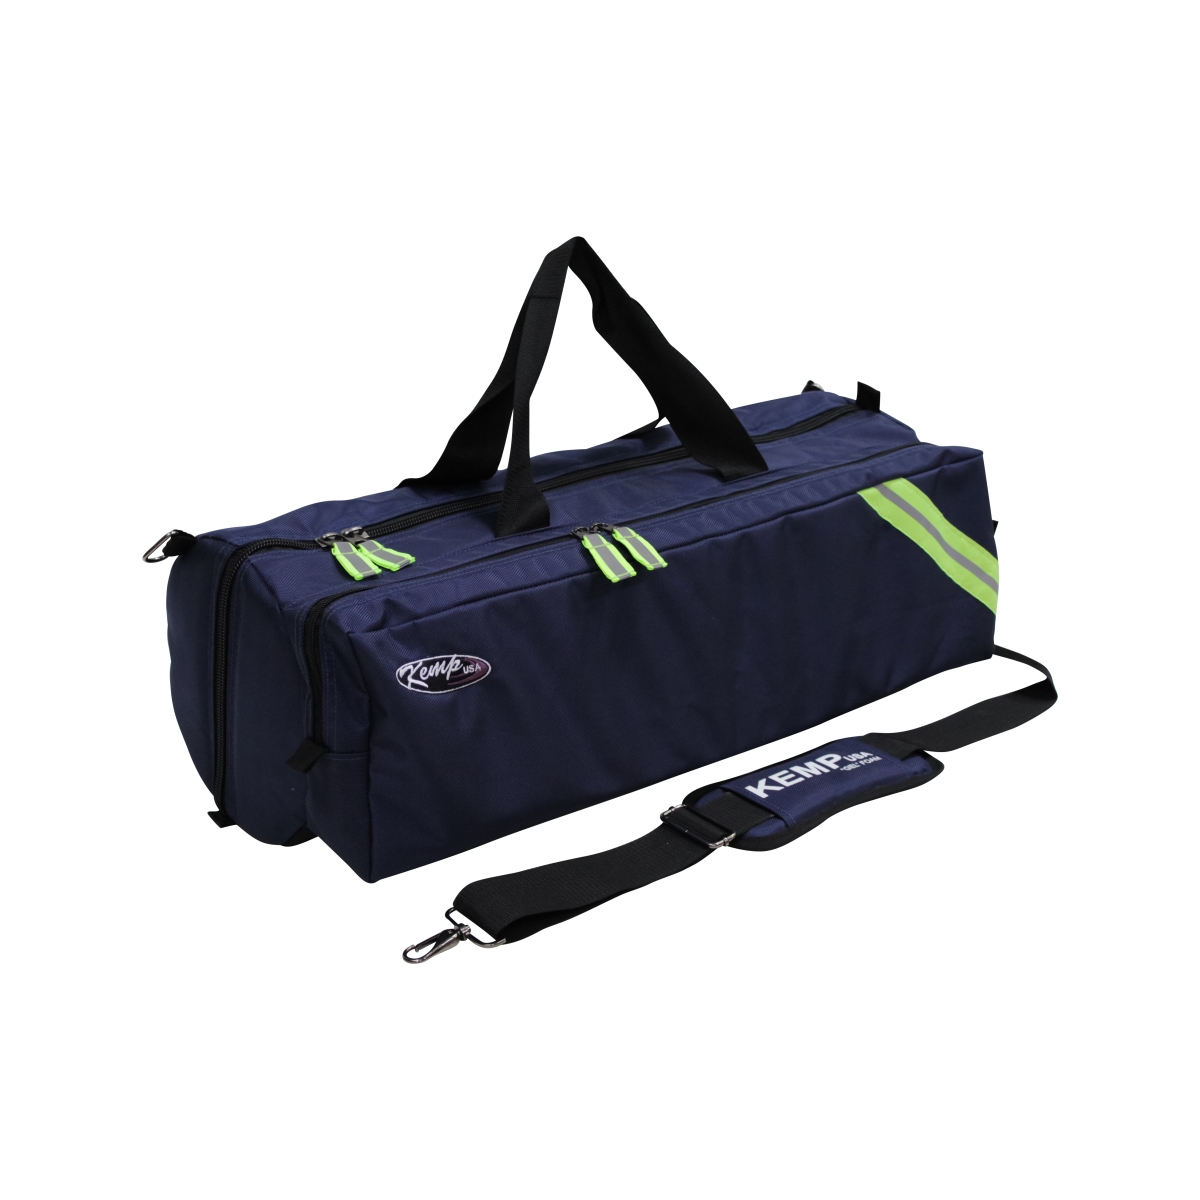 Picture of Kemp USA 10-109-NVY-PRE Premium Oxygen Bag, Navy Blue